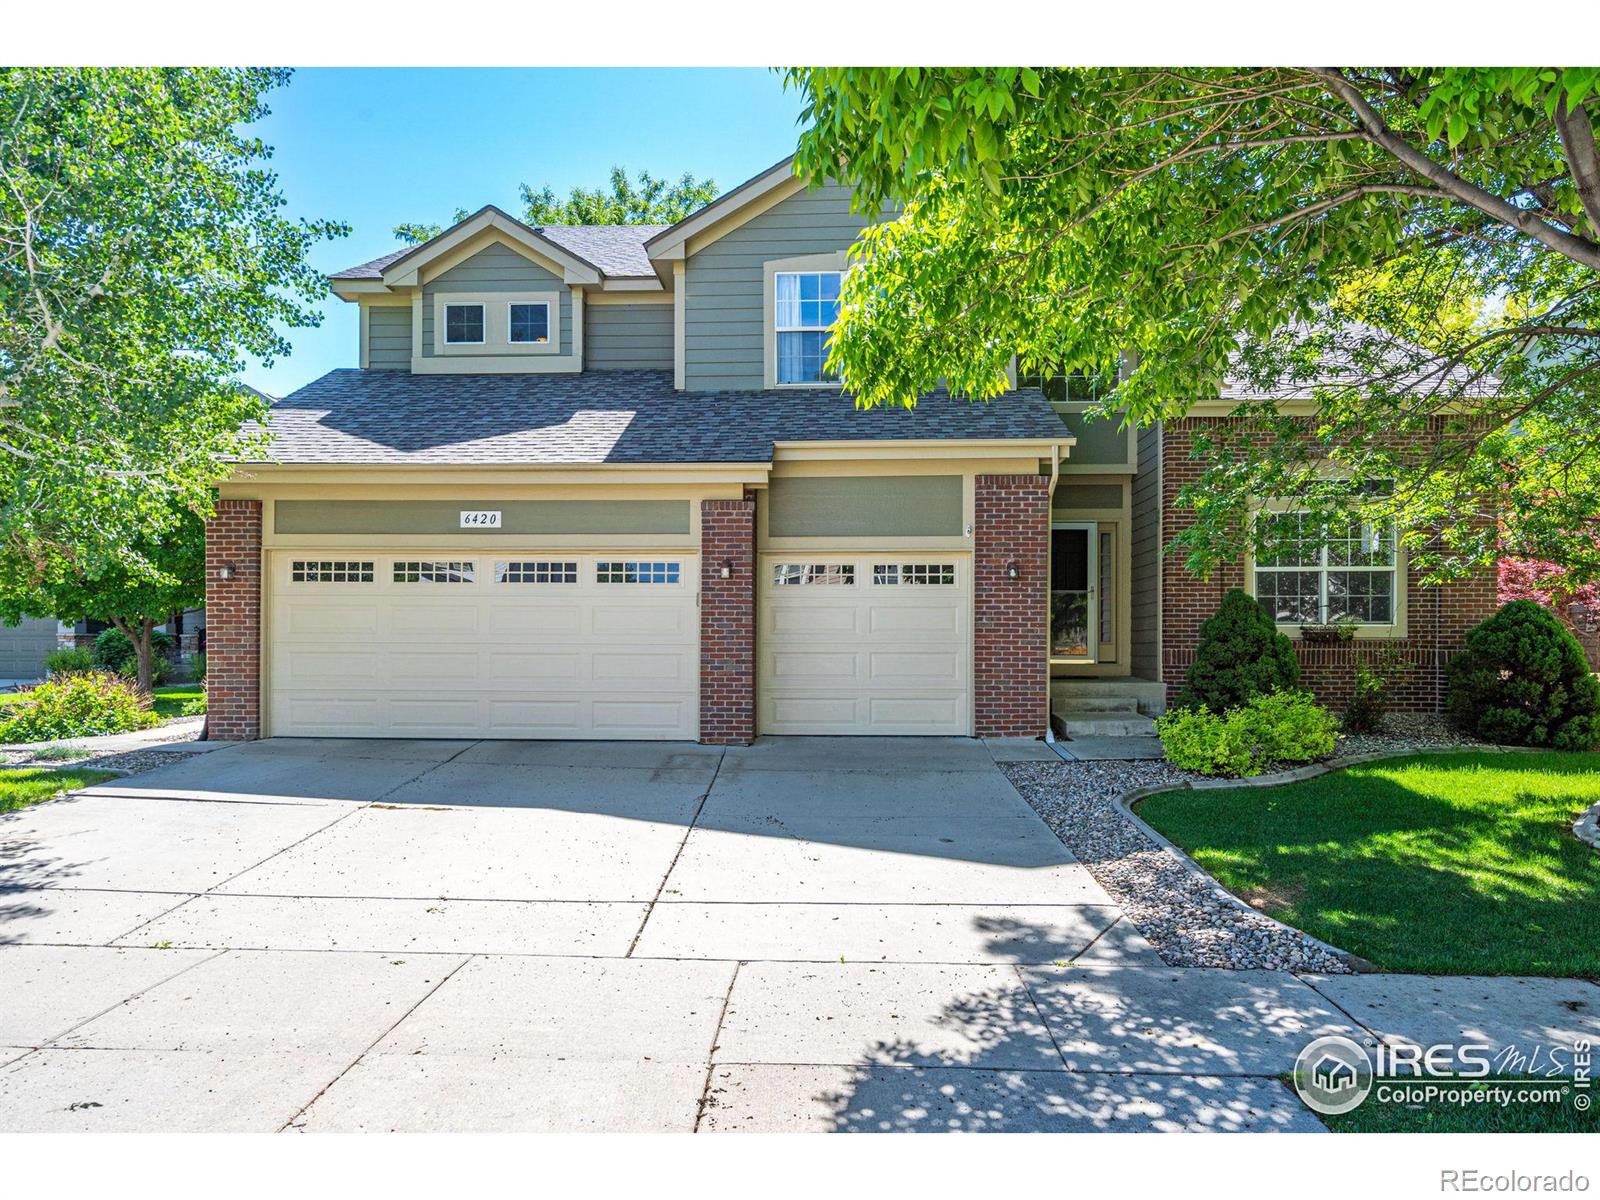 Report Image for 6420  Garrison Court,Fort Collins, Colorado